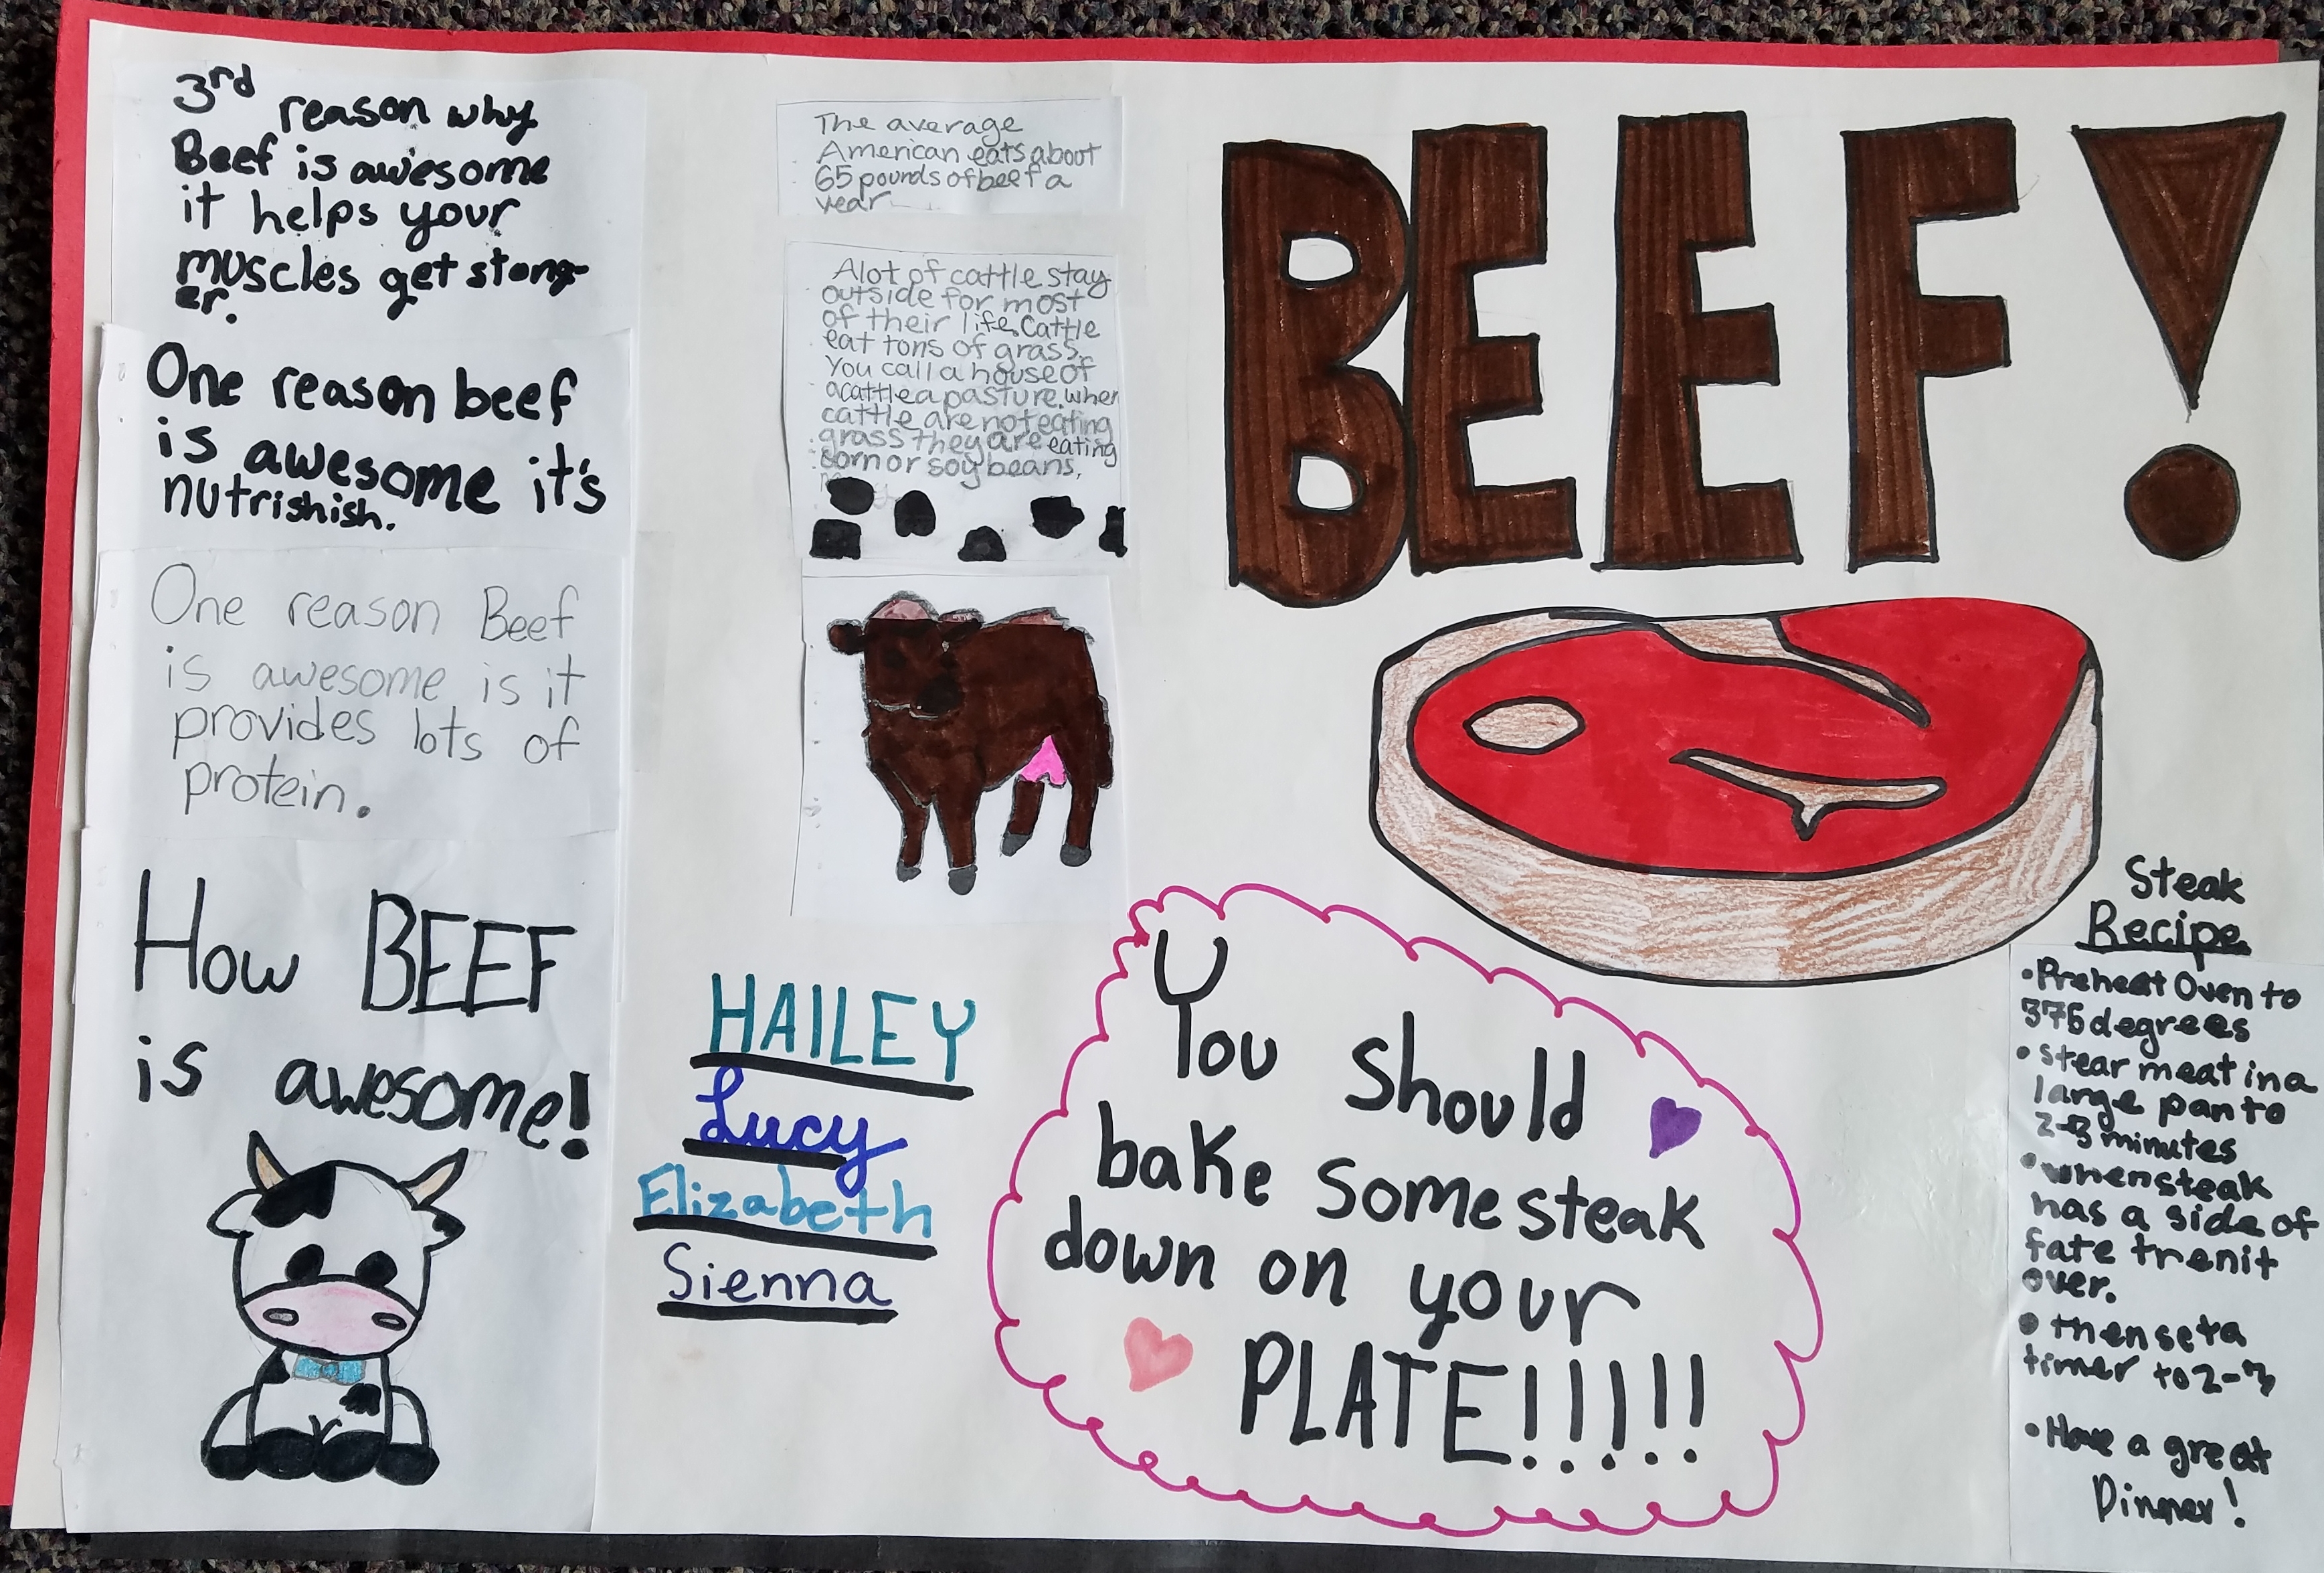 Winners Selected in Beef Marketing Competition